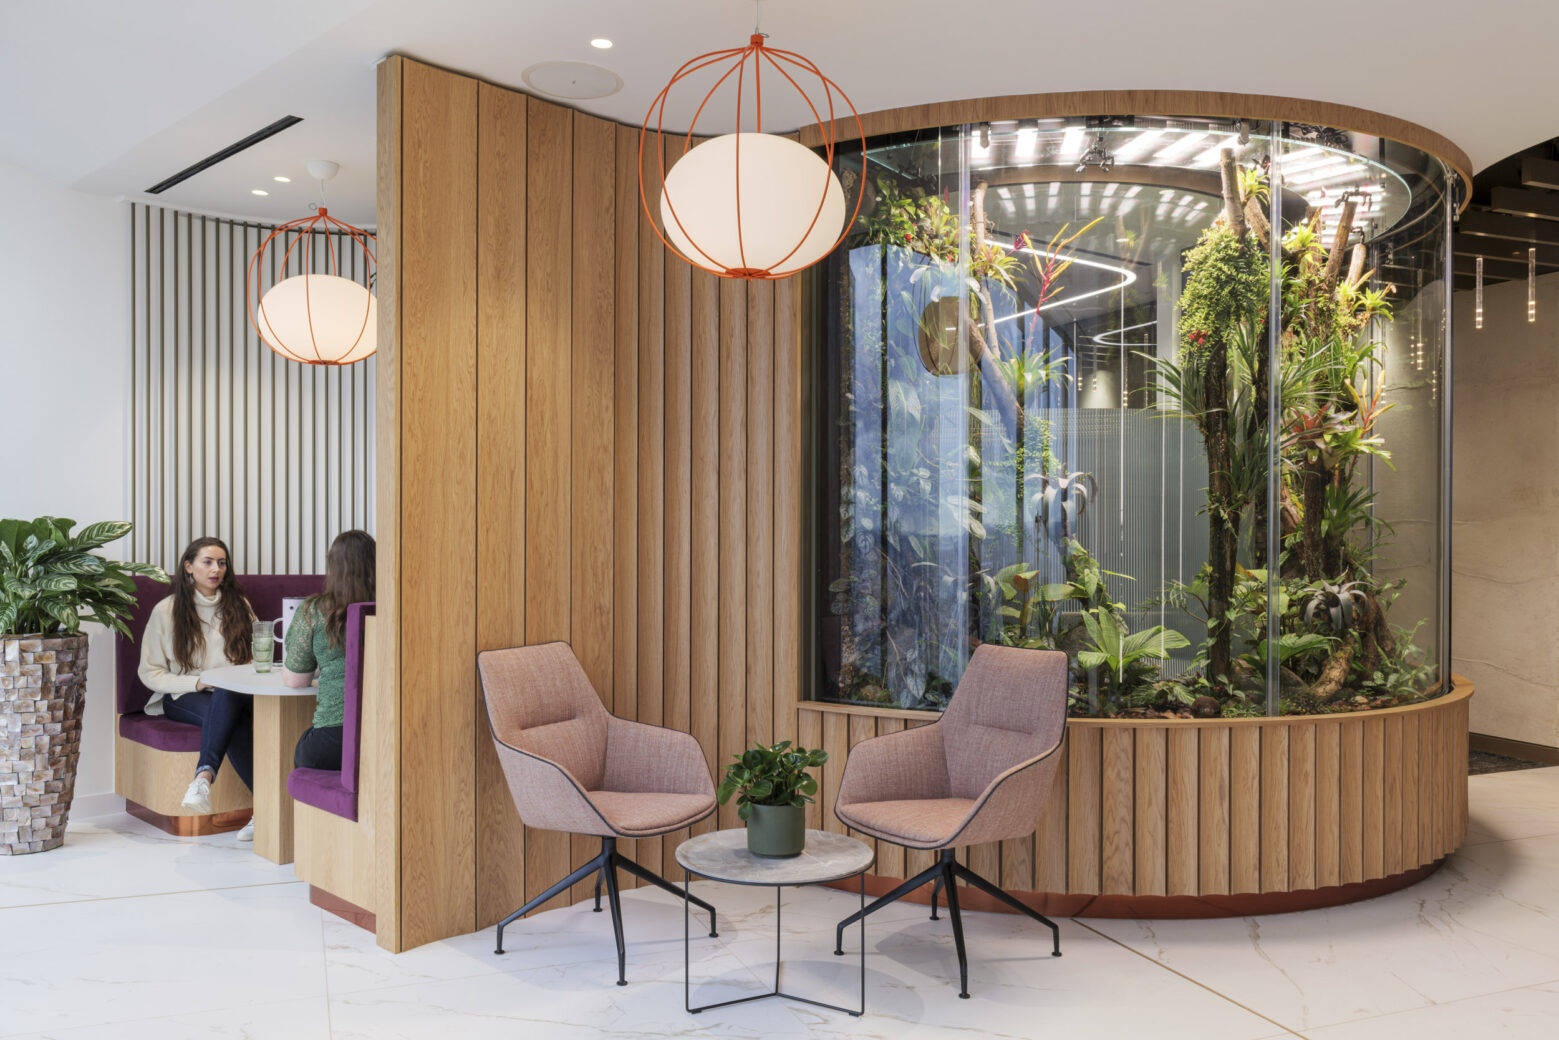 Align London Global Insurance Firm Workplace - Indoor Terrarium and Reception